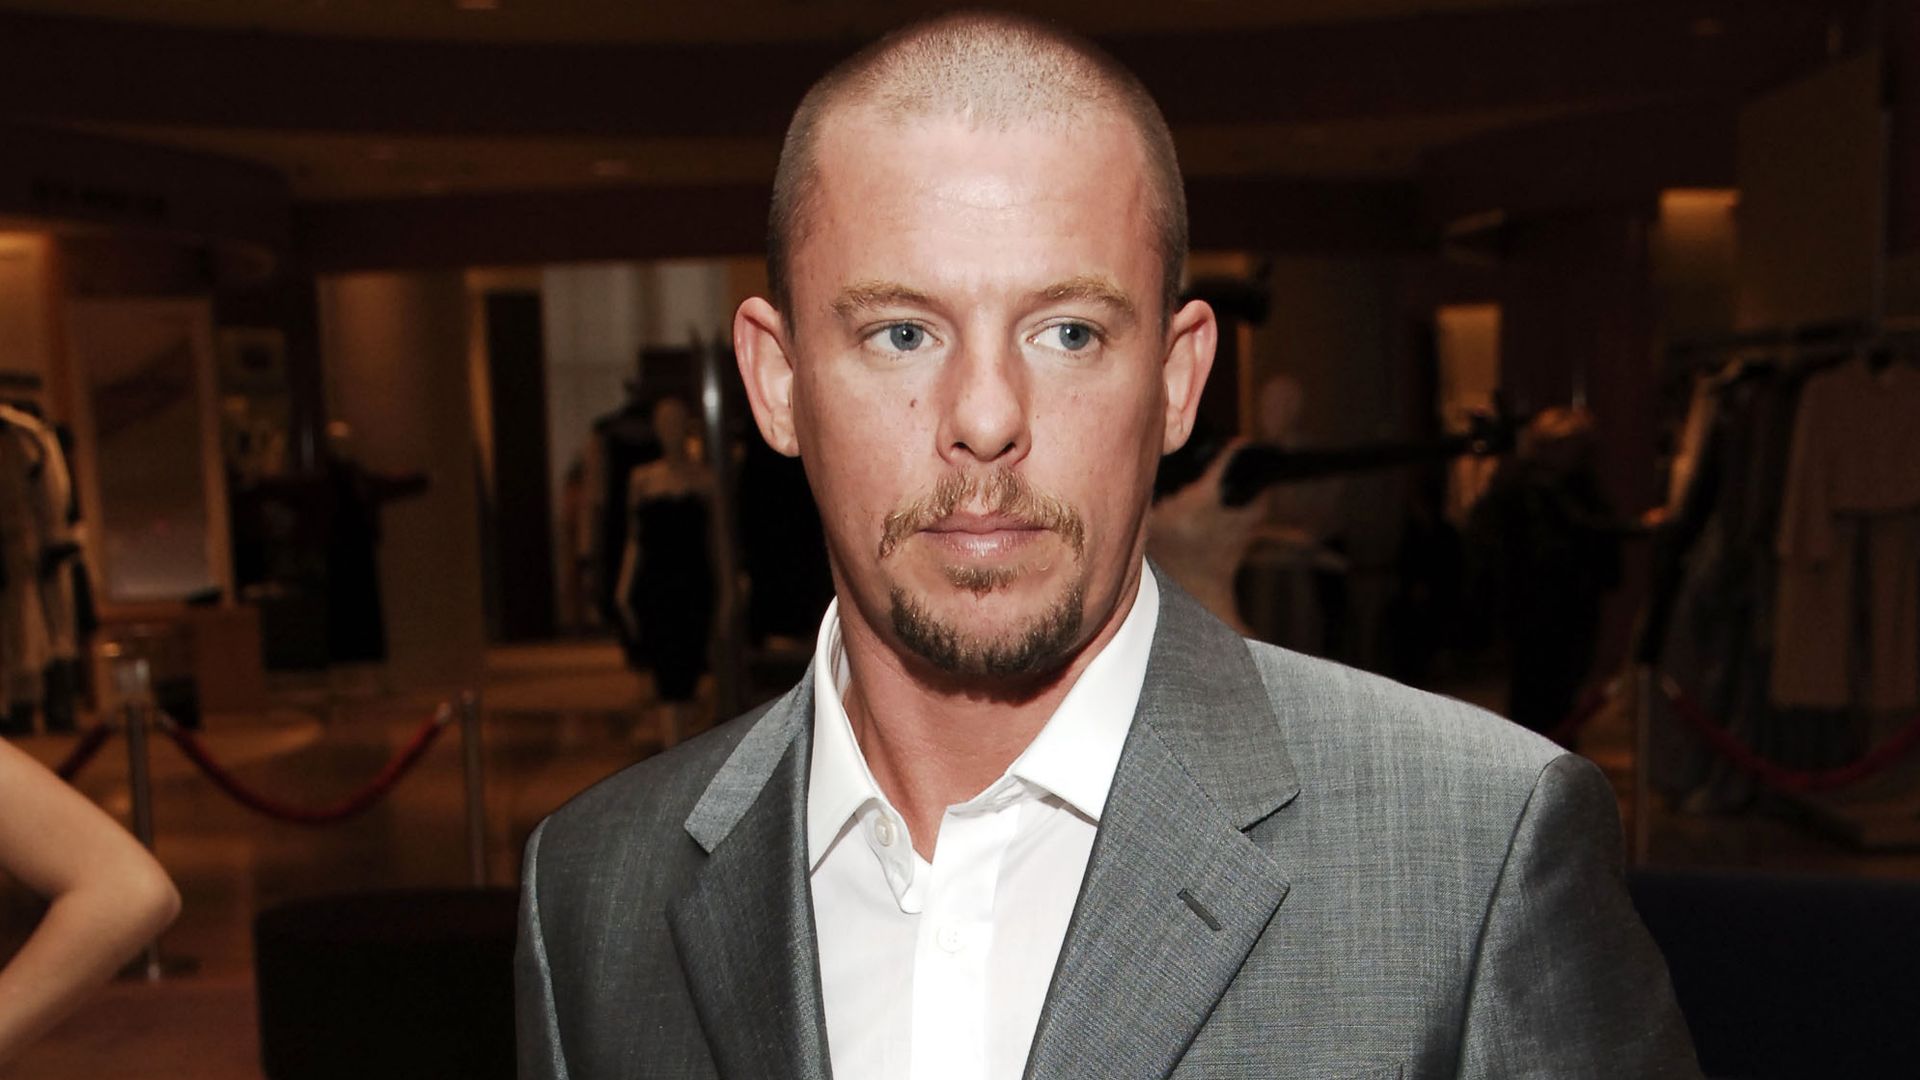 Alexander McQueen launches Japanese Flagship Store